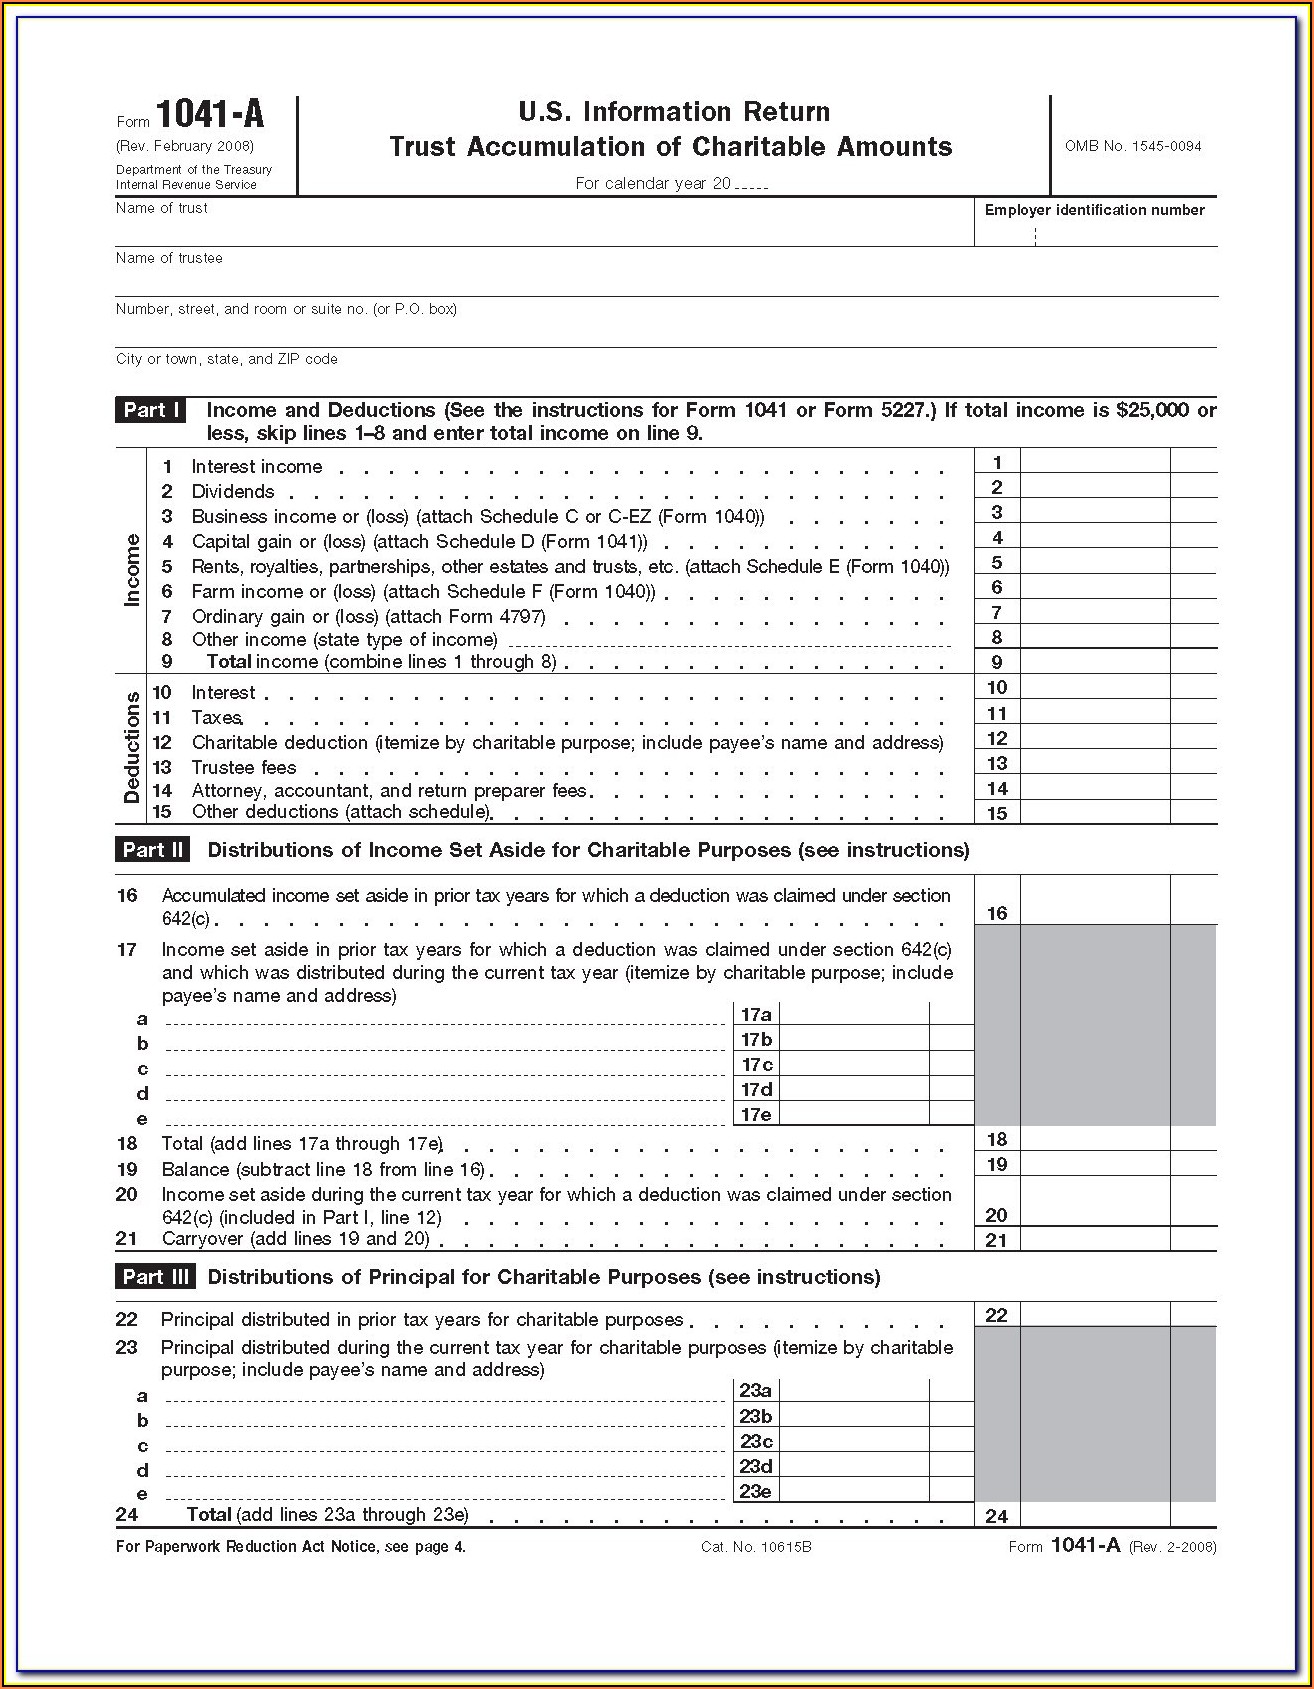 Irs Forms 990 Ez Schedule A